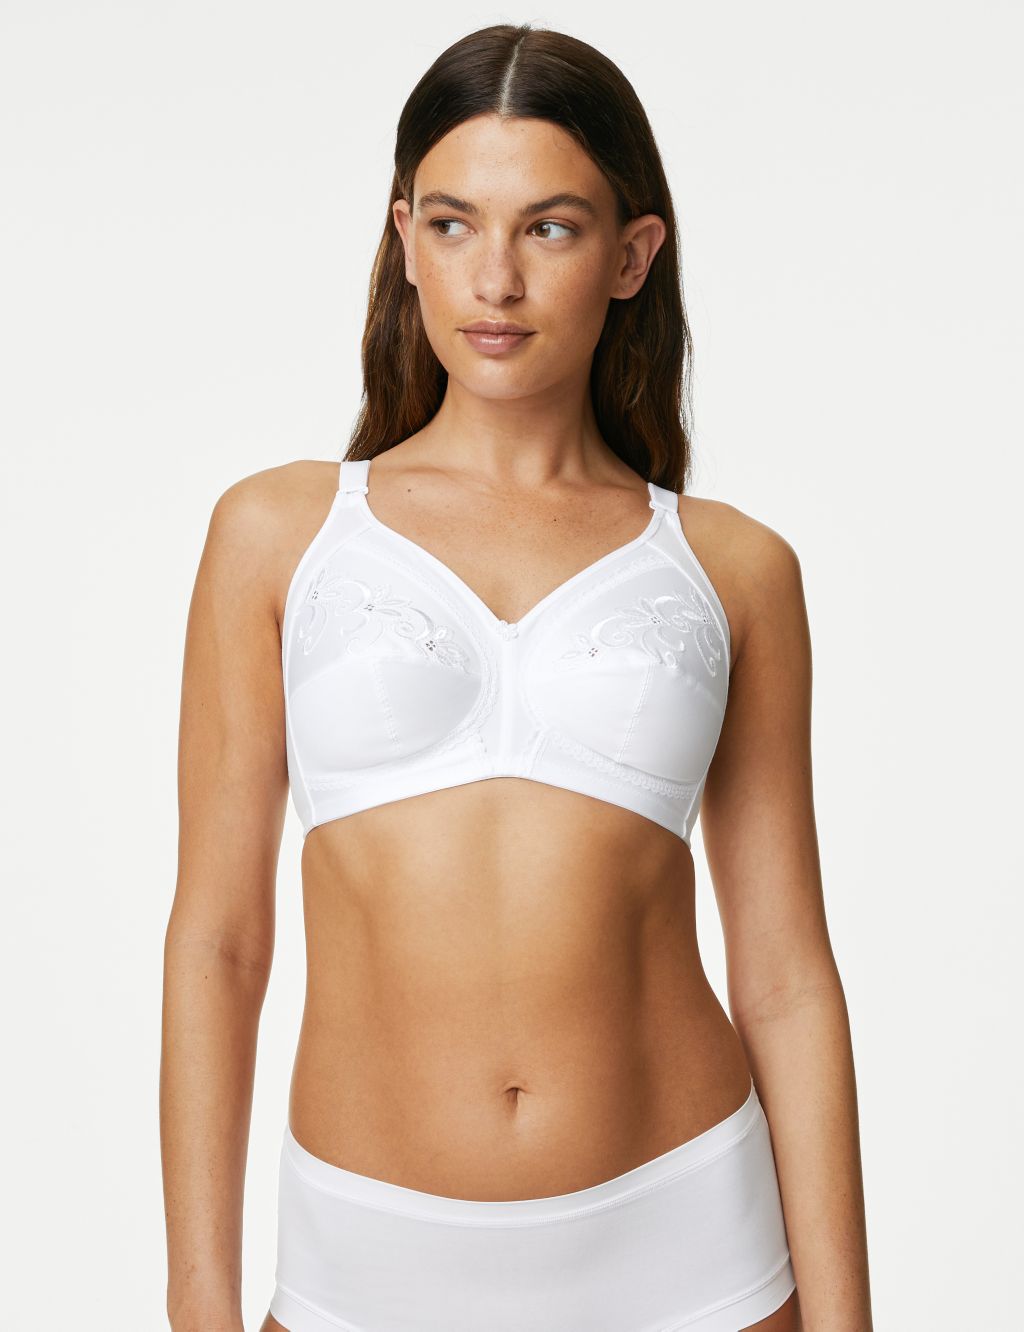 Total Support Embroidered Full Cup Bra B-H image 1